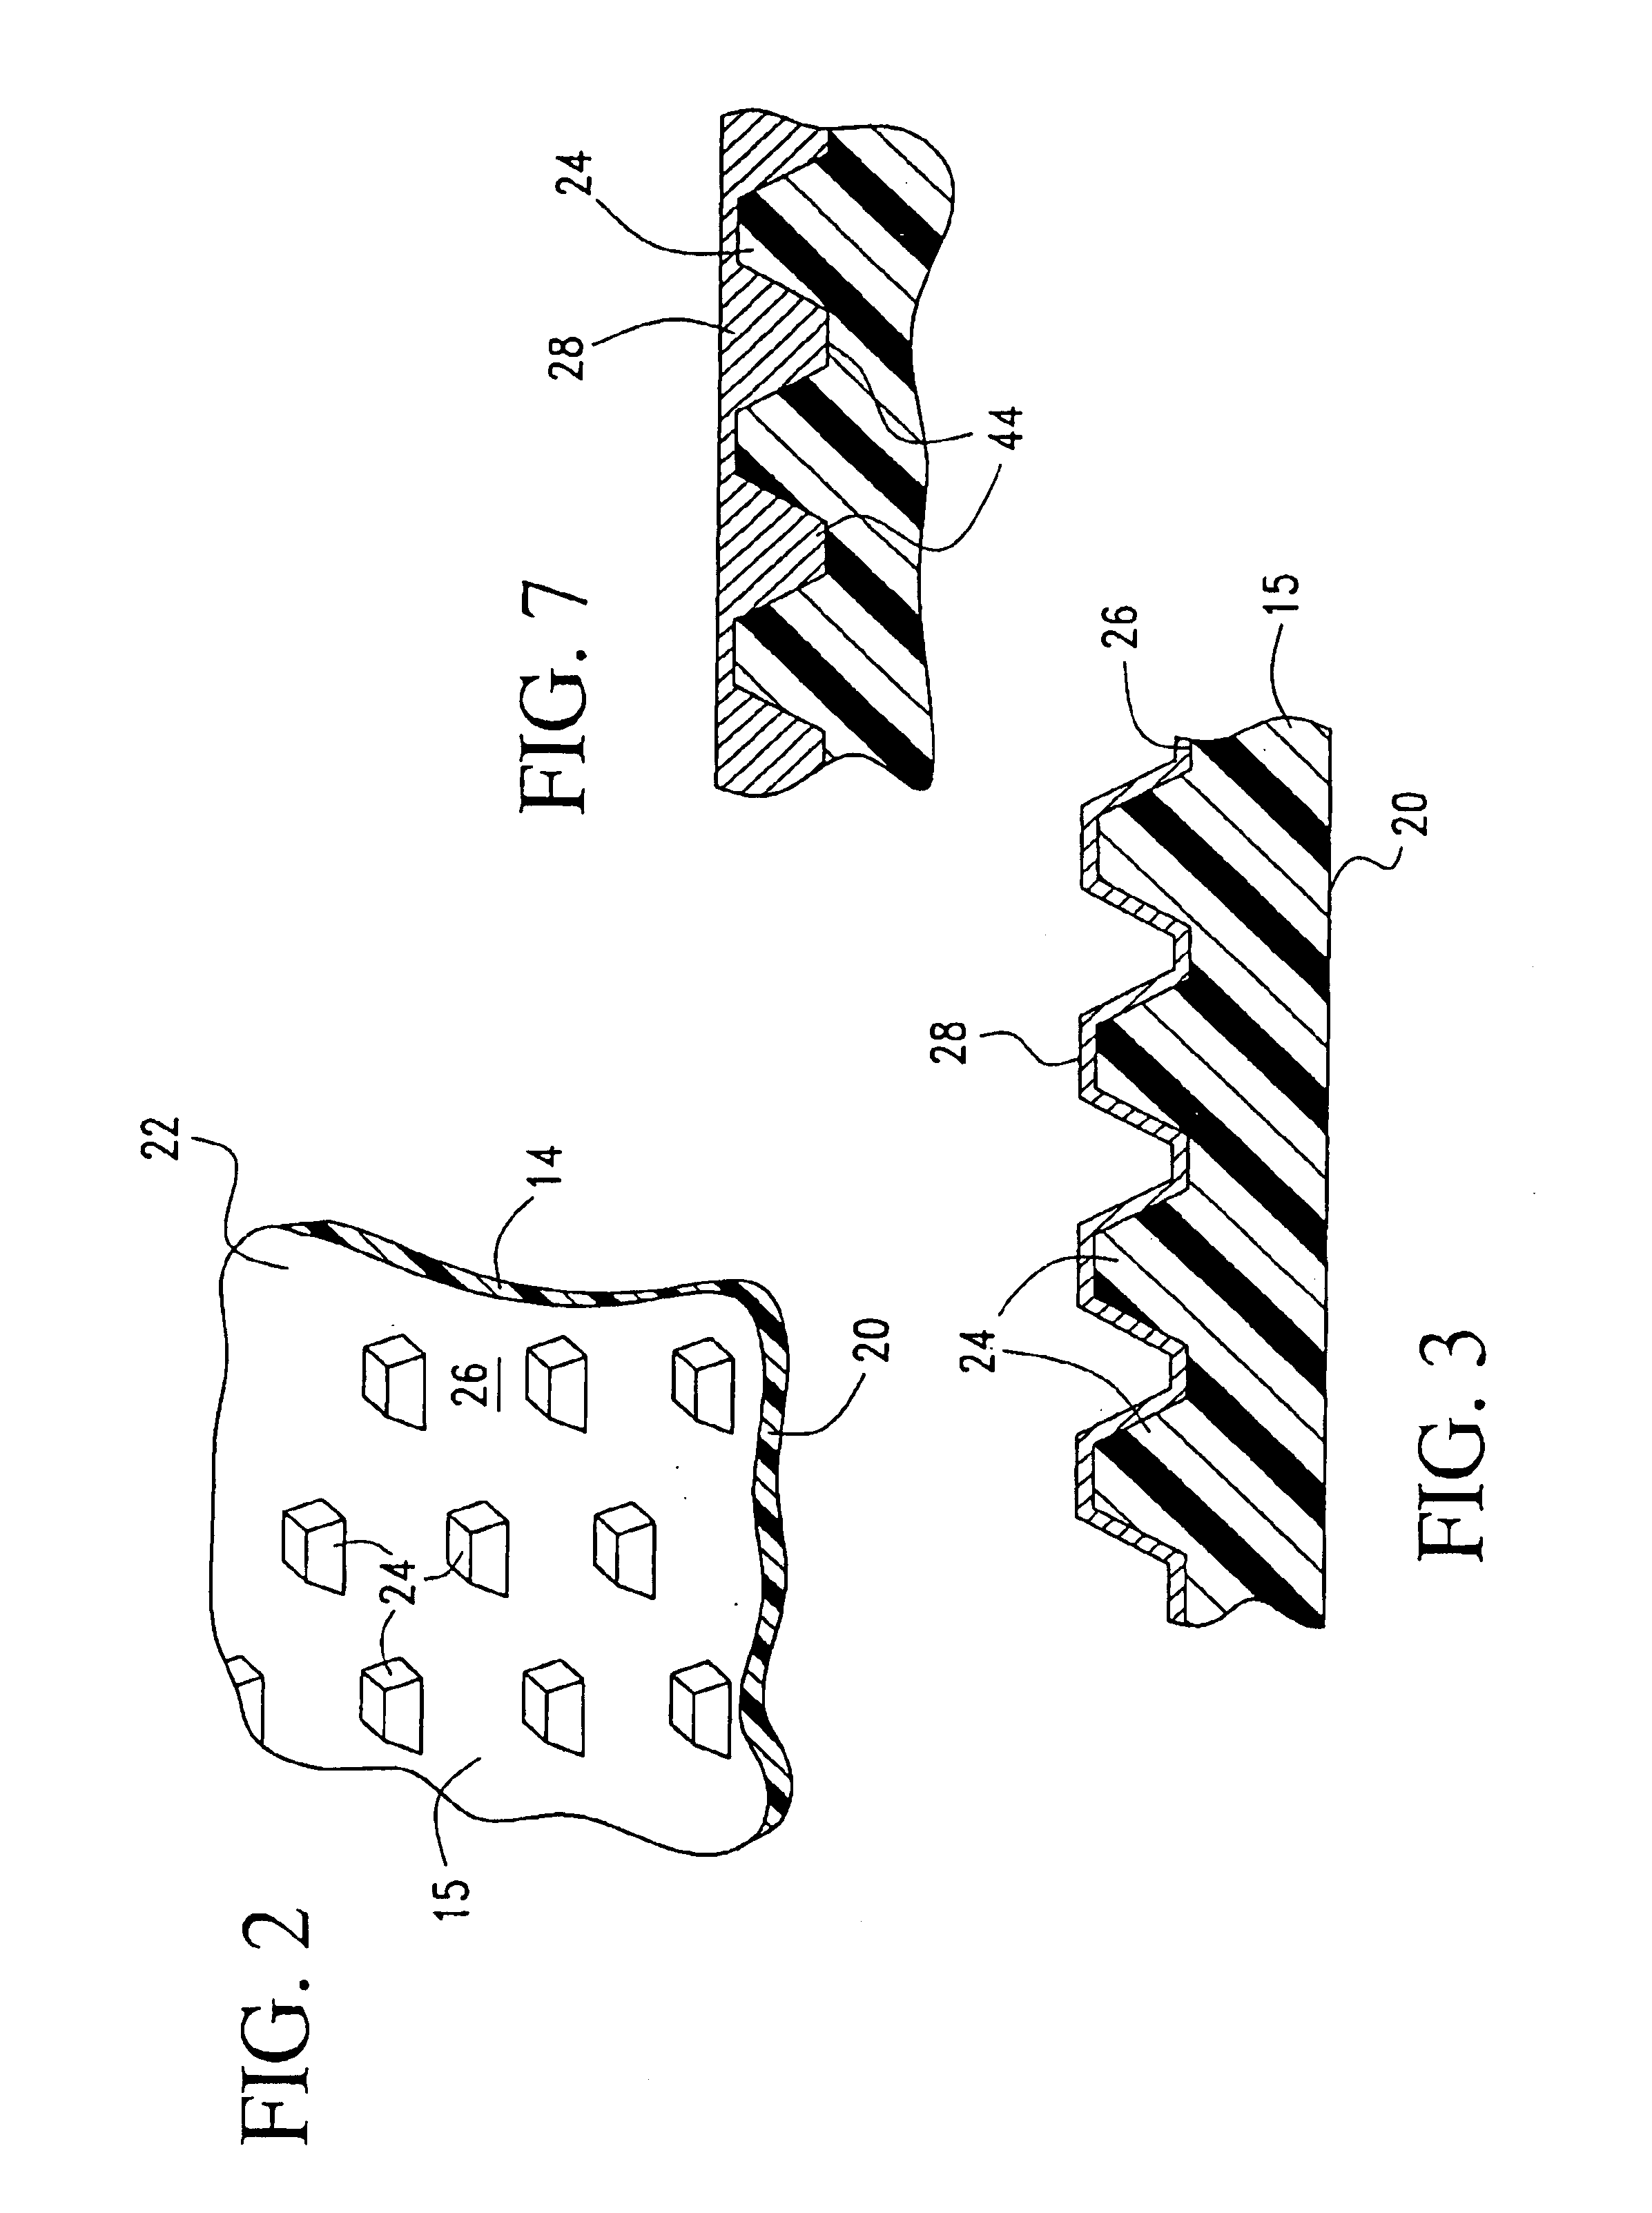 Method for making an abrasion resistant conductive film and gasket